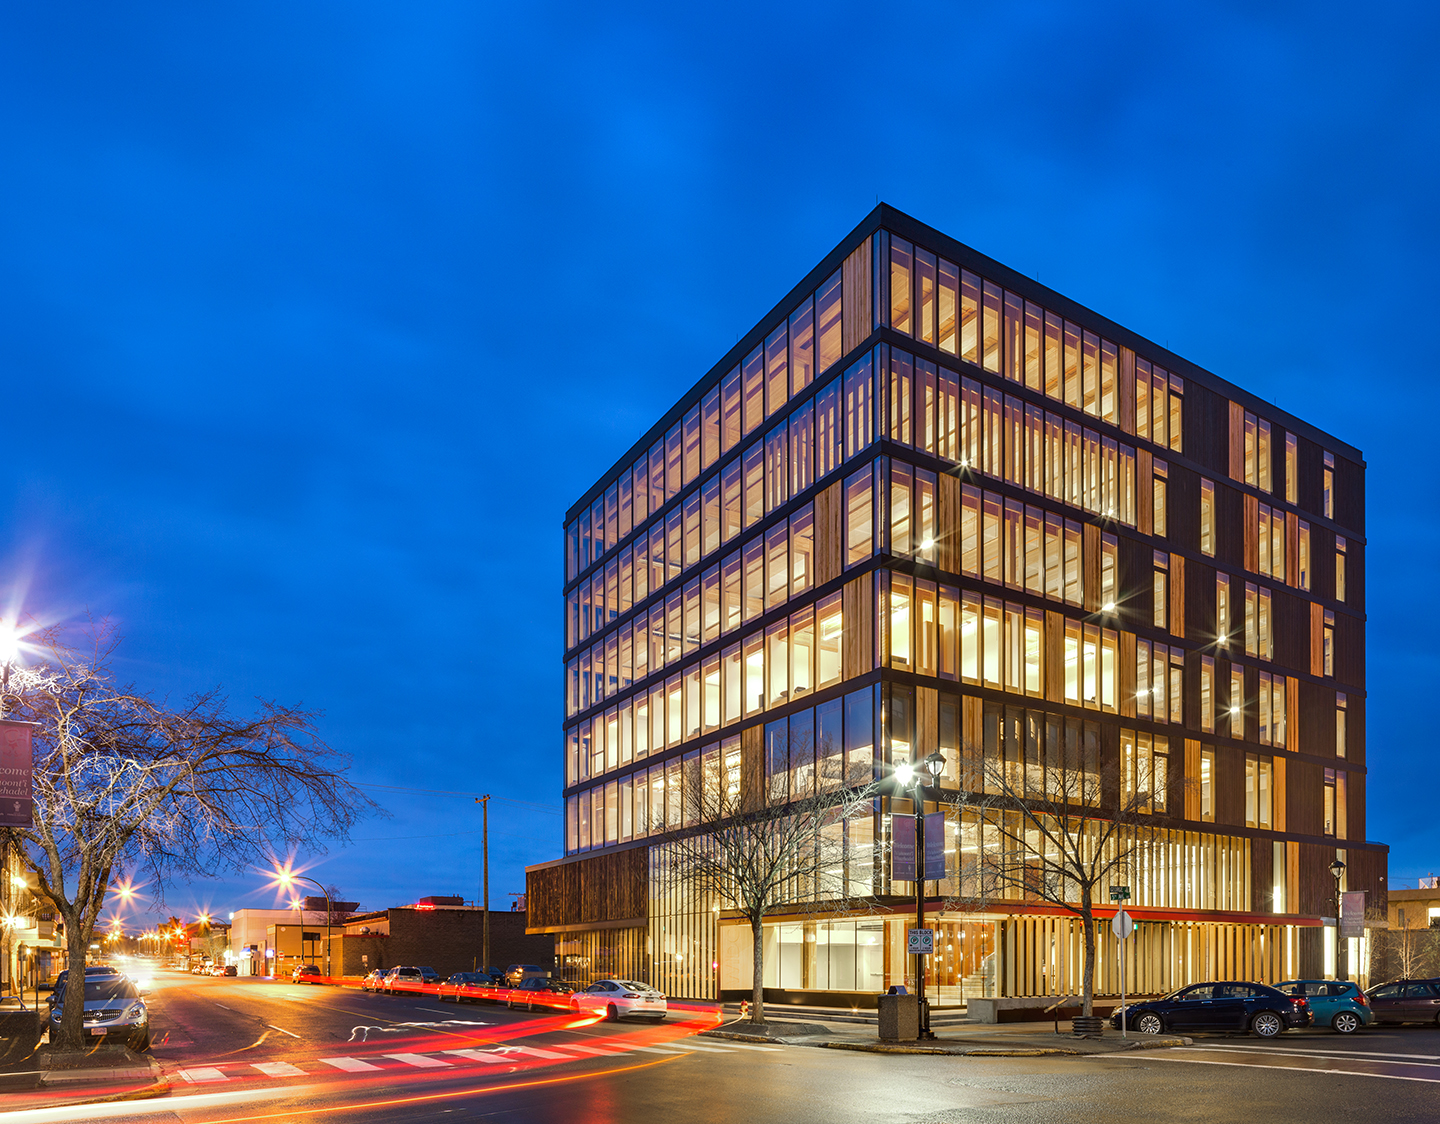 The Wood Innovation and Design Centre in downtown Prince George features inventive use of wood solutions to solve every-day design and construction challenges